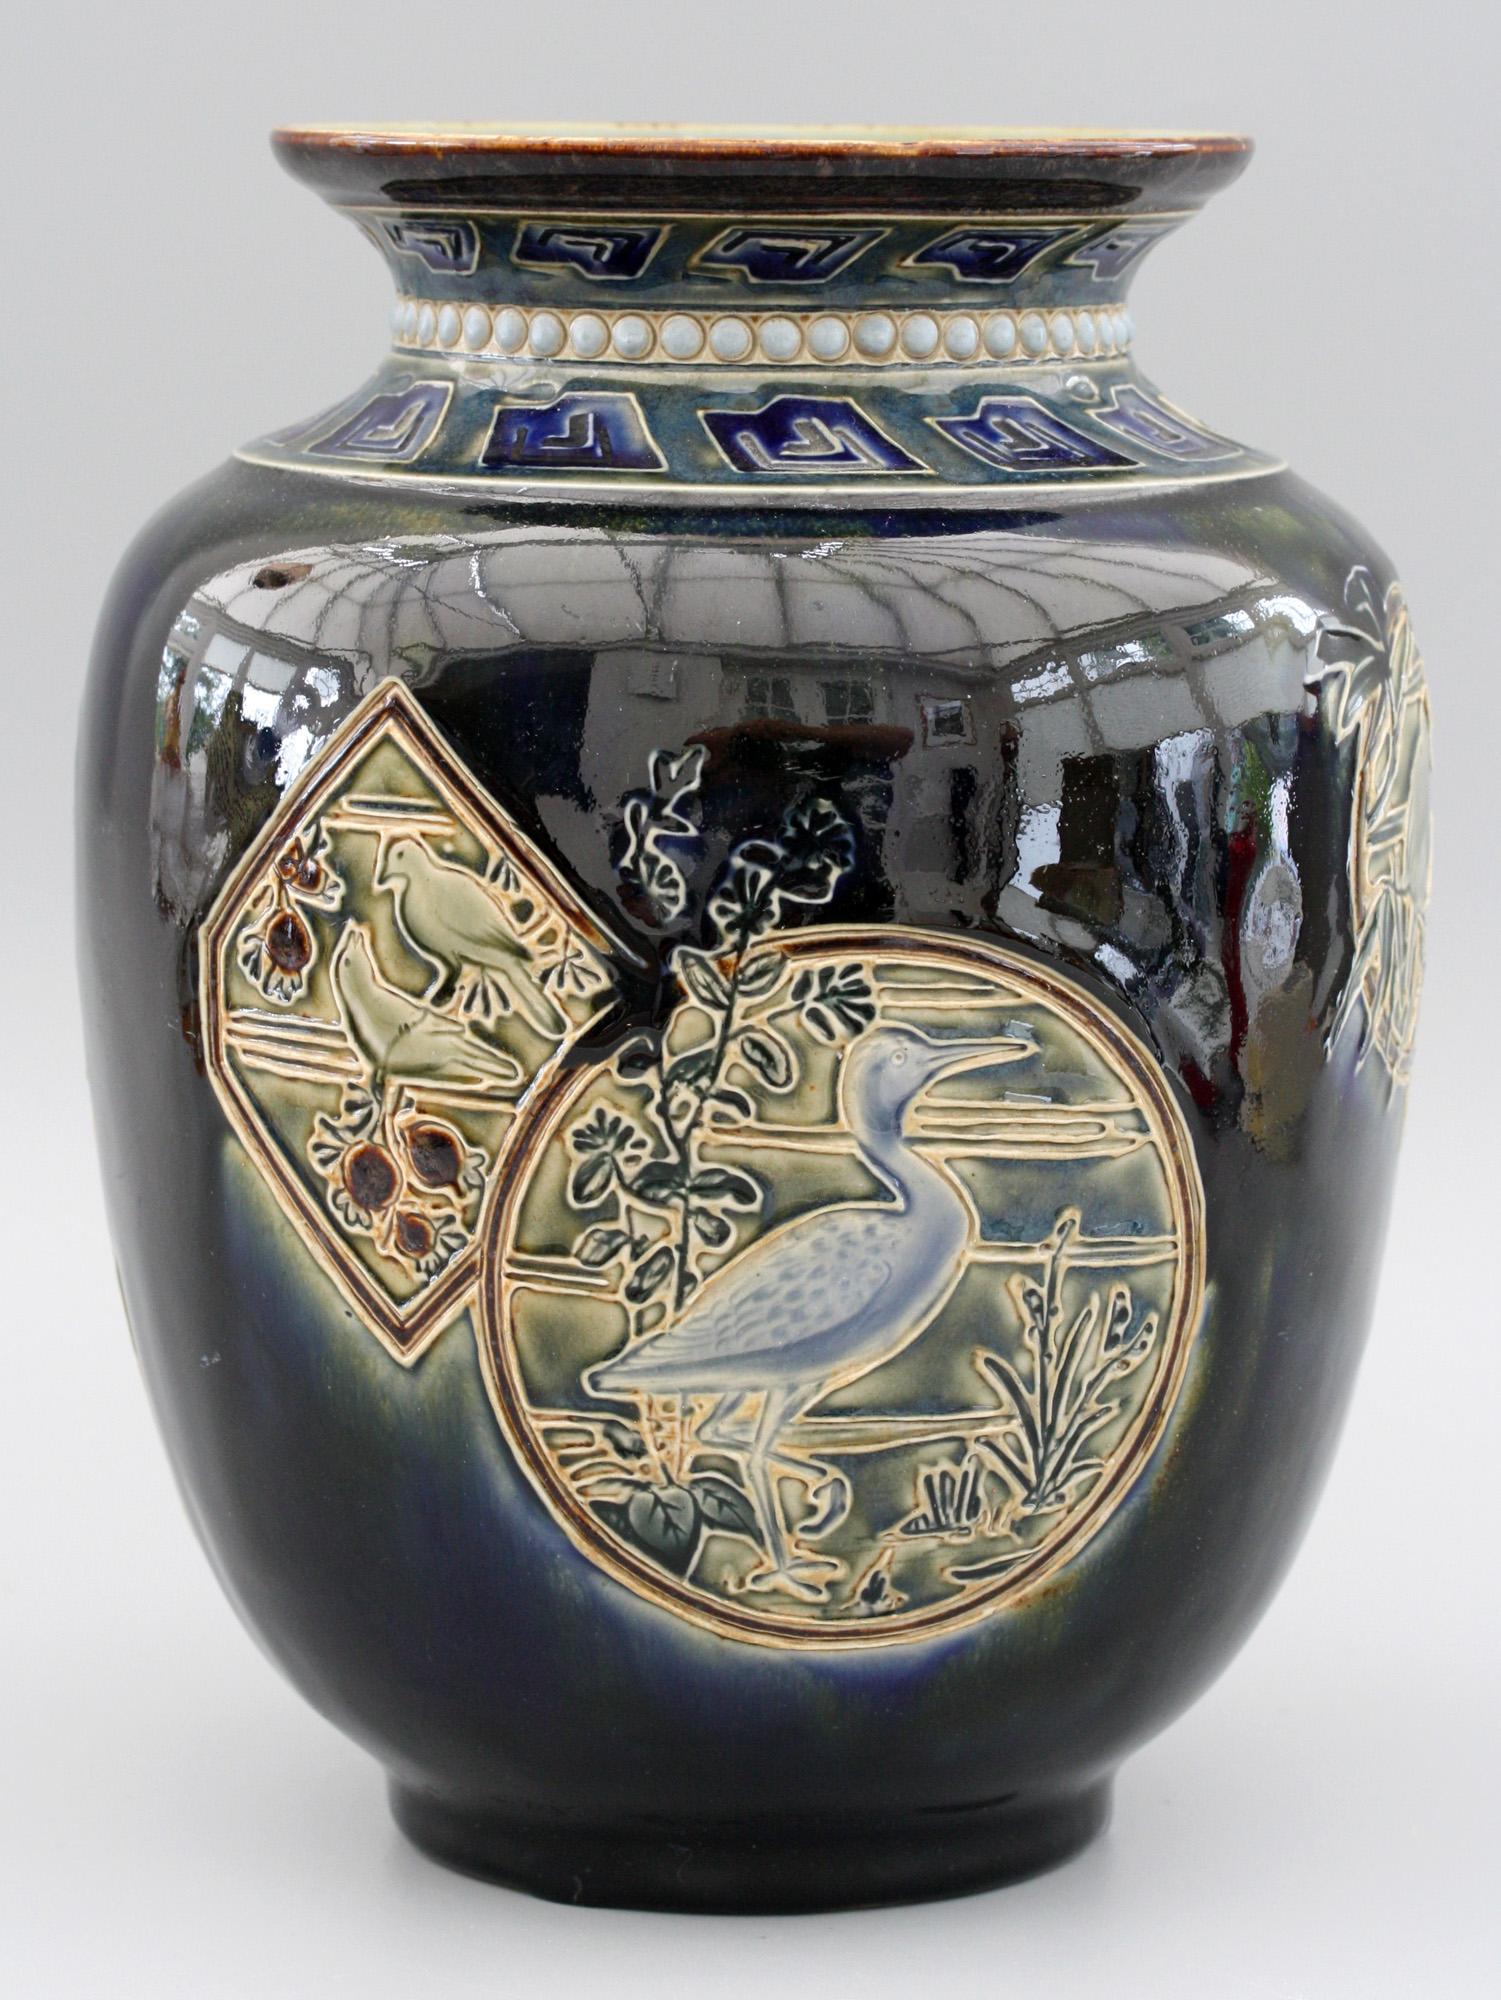 A rare and stunning Doulton Lambeth art pottery vase decorated with Japanese style panel designs containing birds and fish by Edward Dunn and John Broad and dated 1883. The stylish stoneware vase stands on a narrow rounded foot and is of large